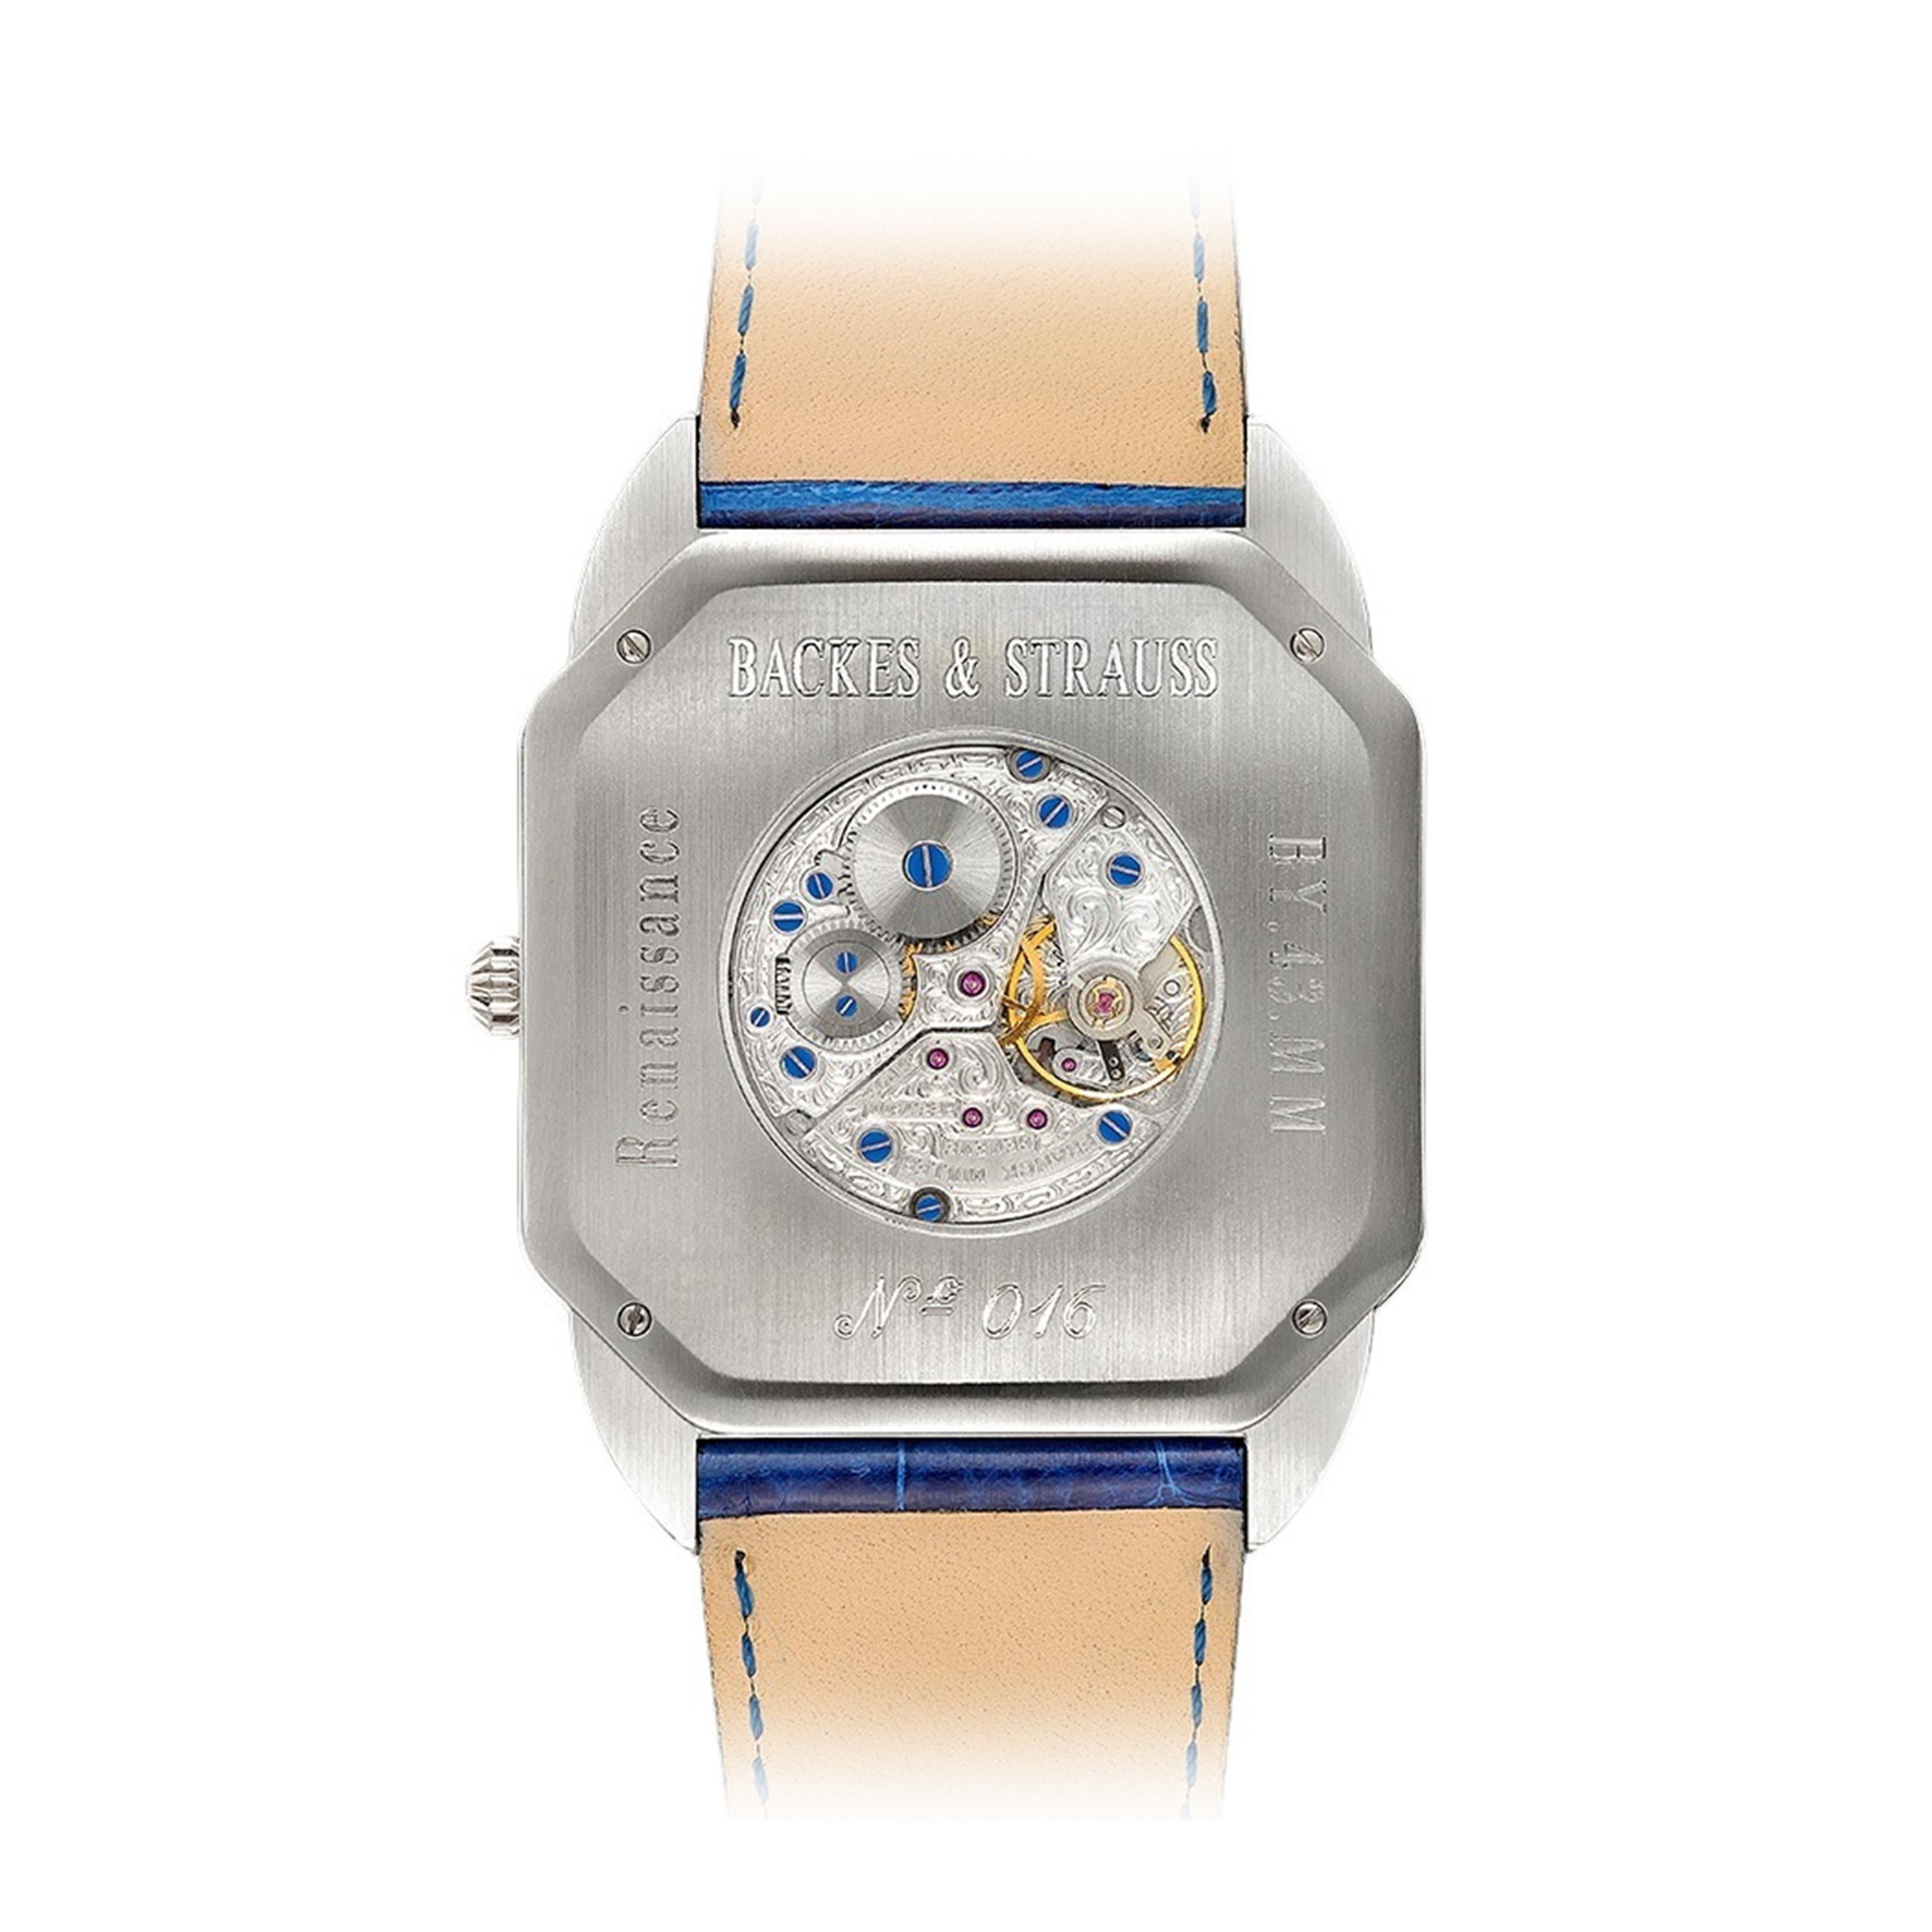 Berkeley Renaissance Steel 43 is a luxury diamond watch for men crafted in stainless steel, featuring a blue square dial with steel roman numerals, mechanical movement. The crown is set with white Ideal Cut diamond. It is a 43 mm casual watch with